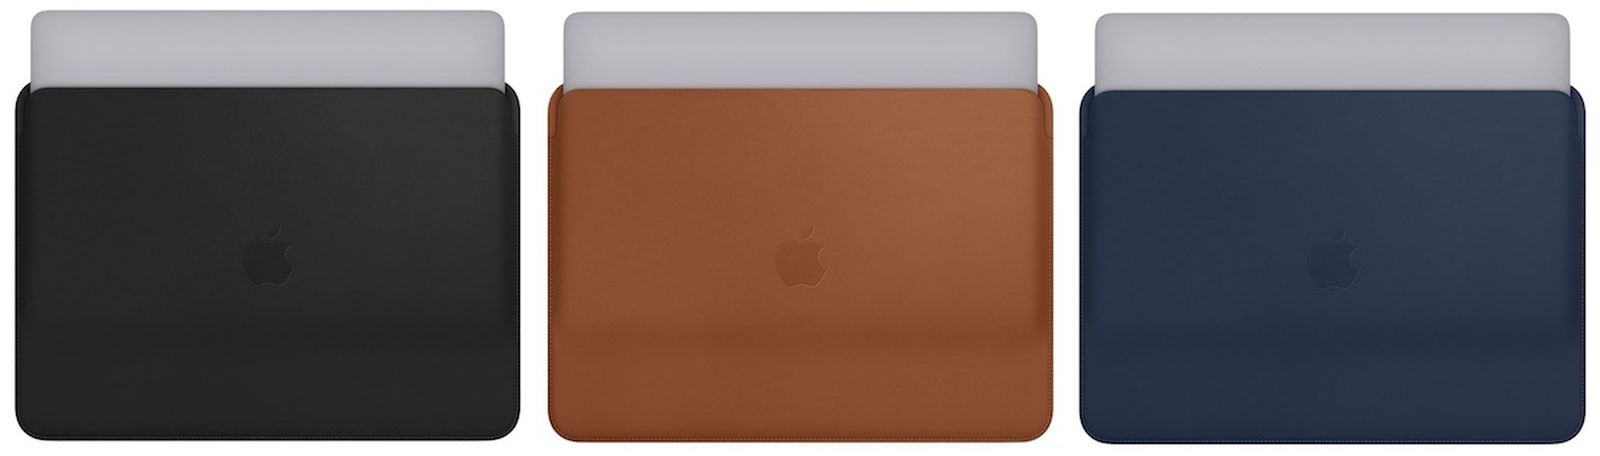 sleeves for macbook pro 13-inch 2018 cult of mac